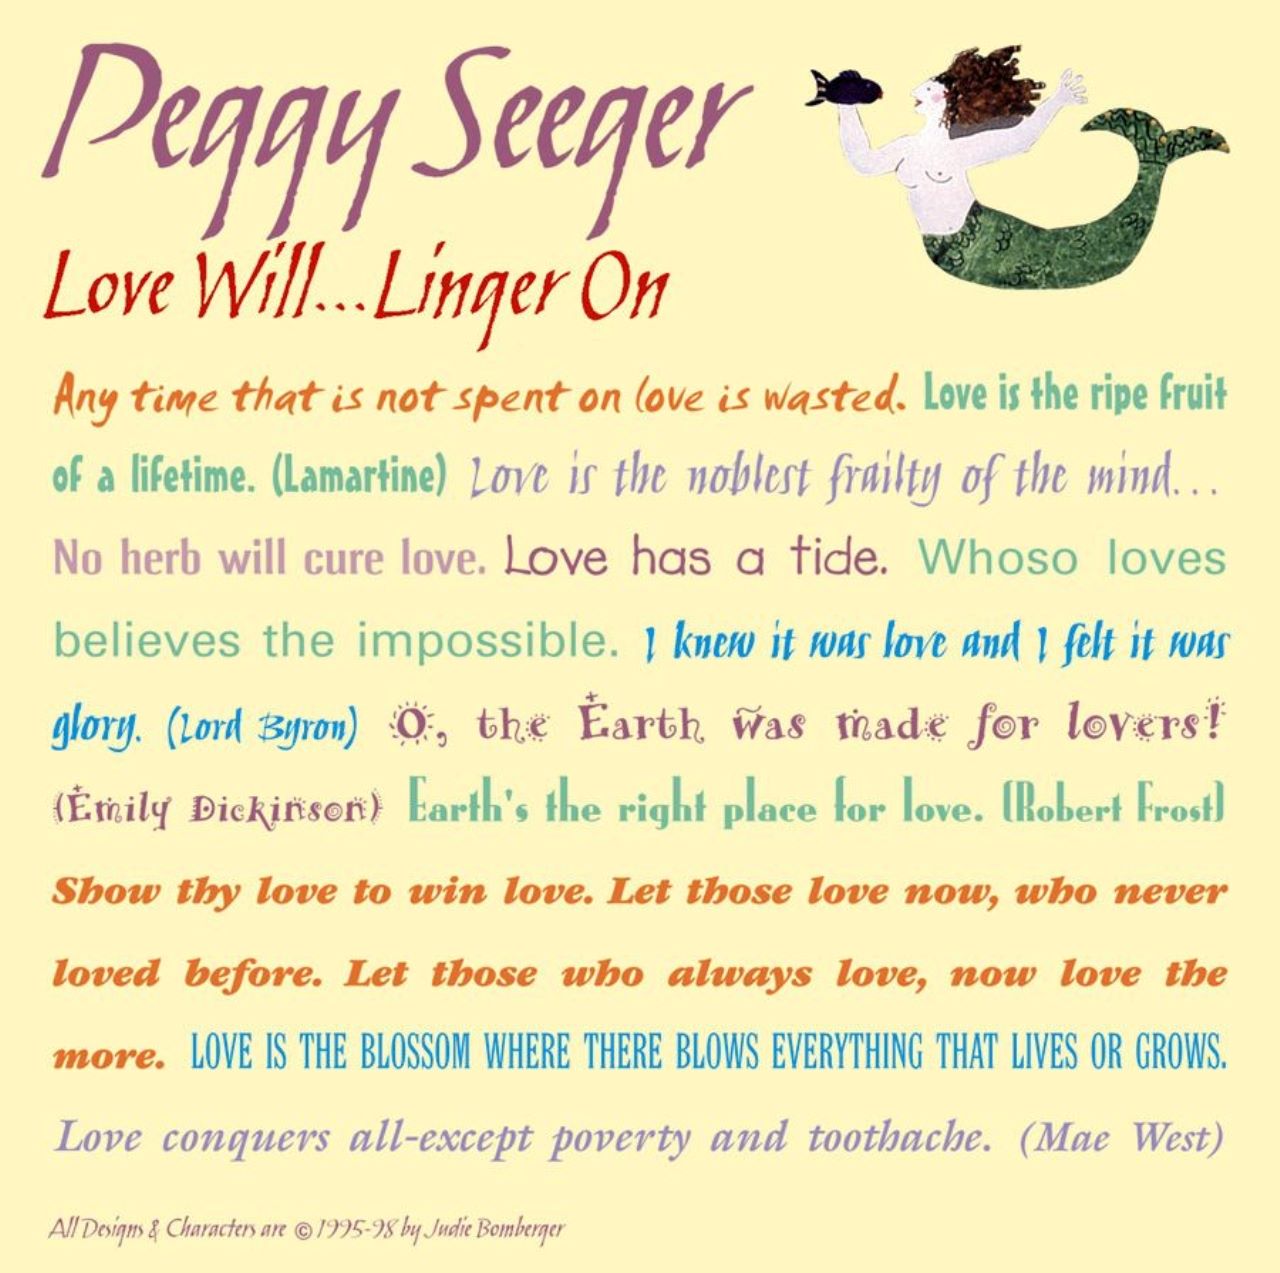 Peggy Seeger - Love Will... Linger On cover album